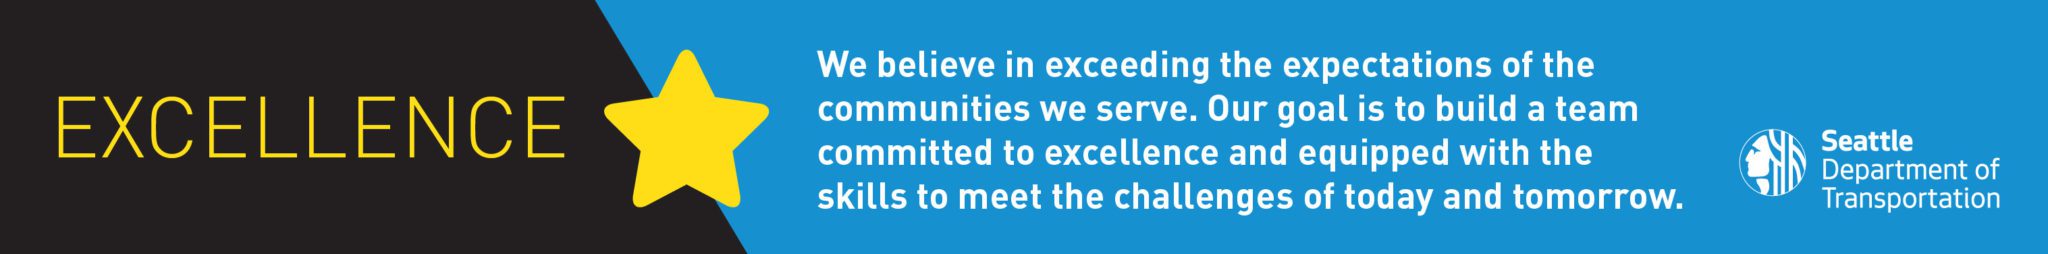 Graphic highlighting Excellence as one of SDOT's core values and goals. A blue and back background banner includes the word "Excellence" in large wording, the SDOT logo, and a yellow star icon.